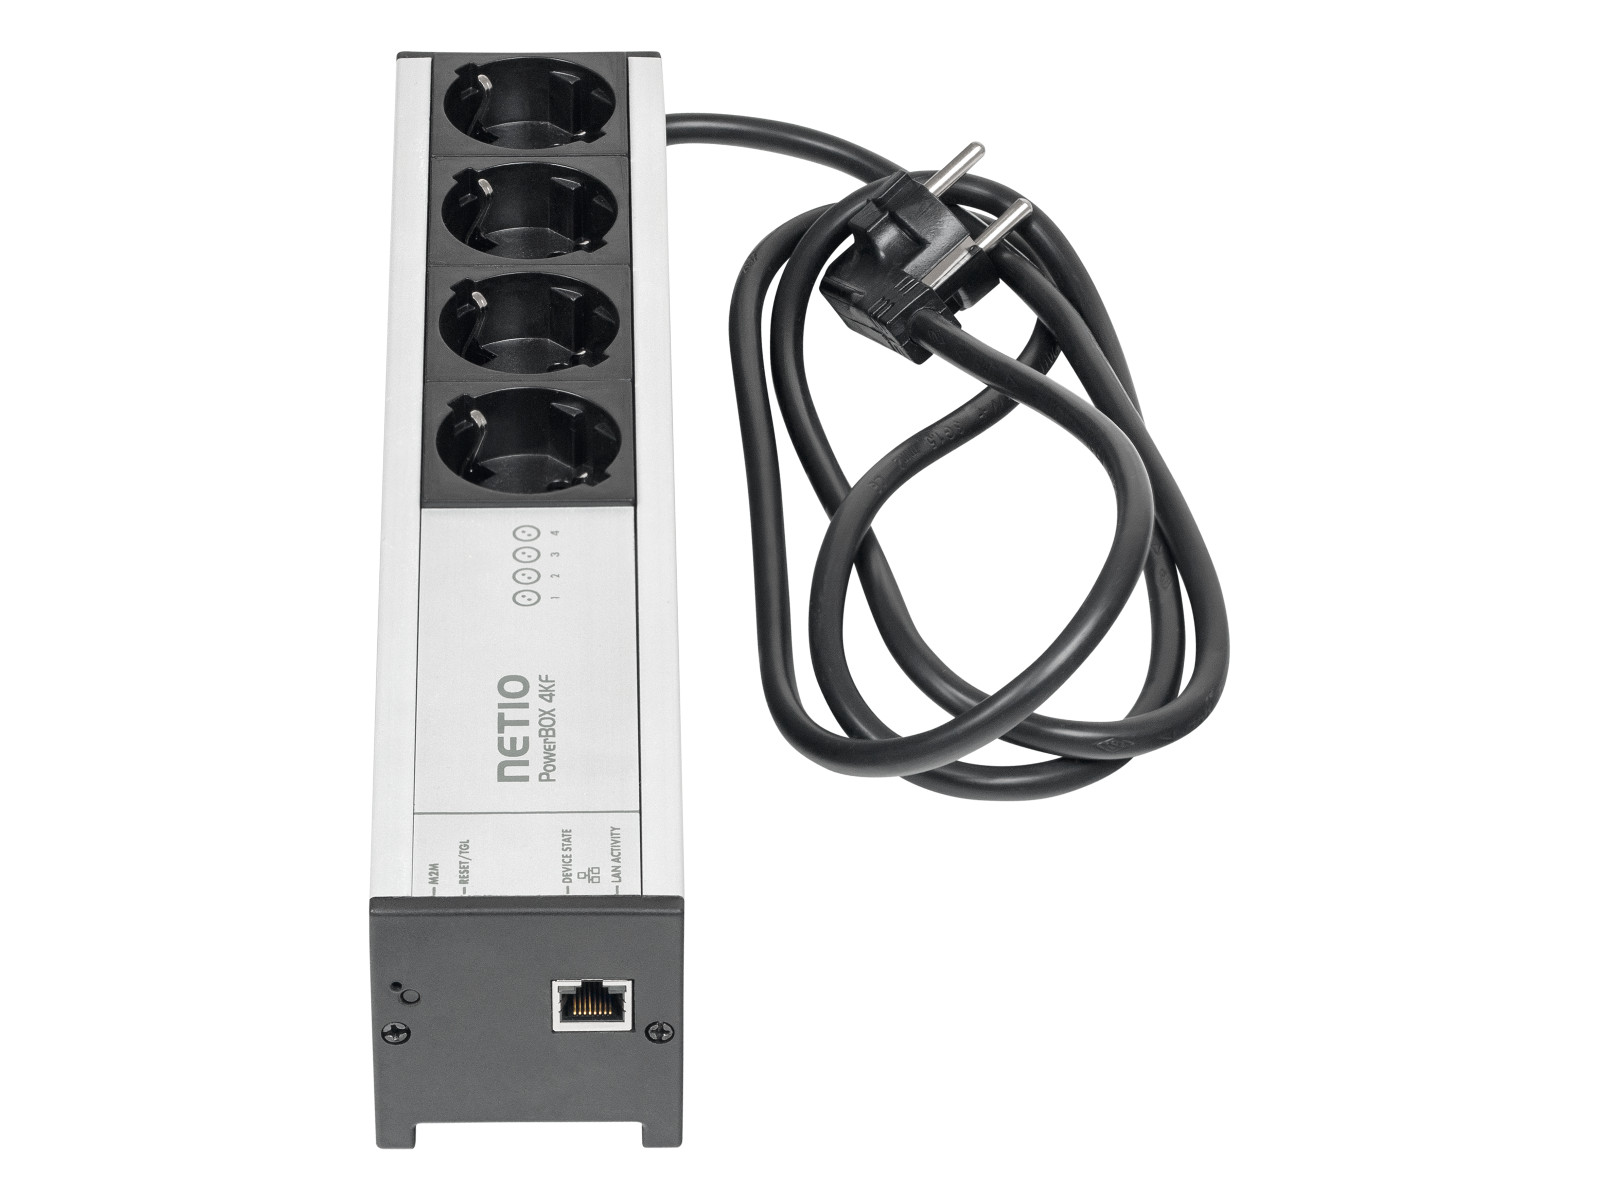 PowerBOX 4KF is 4 outputs smart power-strip PDU with LAN. Each output can be switched &amp; metered individually. Web interface, ZCS, NETIO Cloud, Open API protocols (MQTT-flex, JSON, Modbus/TCP, SNMP, ...) Type F - schuko power socket 230V/16A.